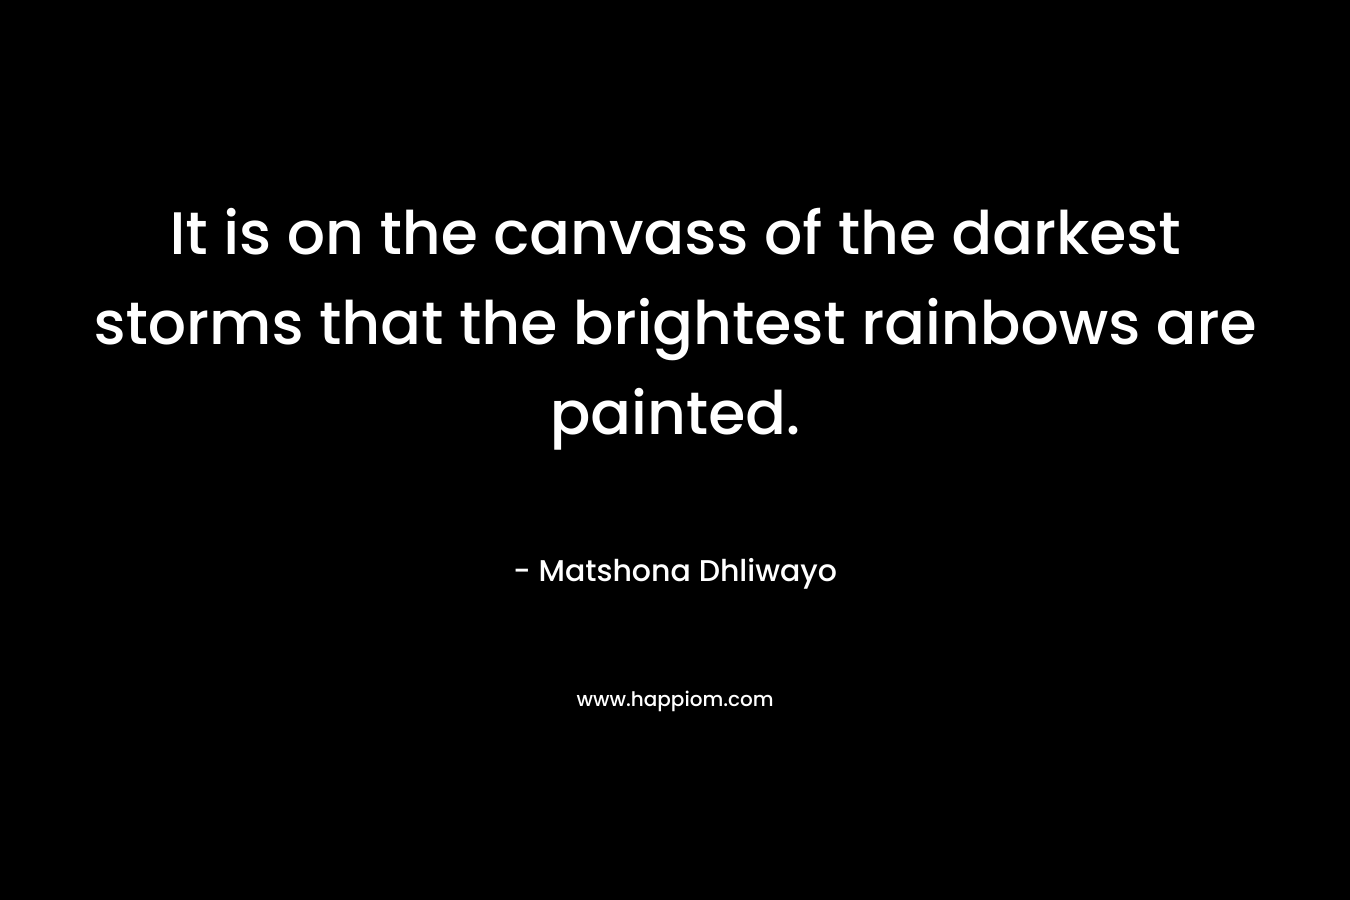 It is on the canvass of the darkest storms that the brightest rainbows are painted. – Matshona Dhliwayo